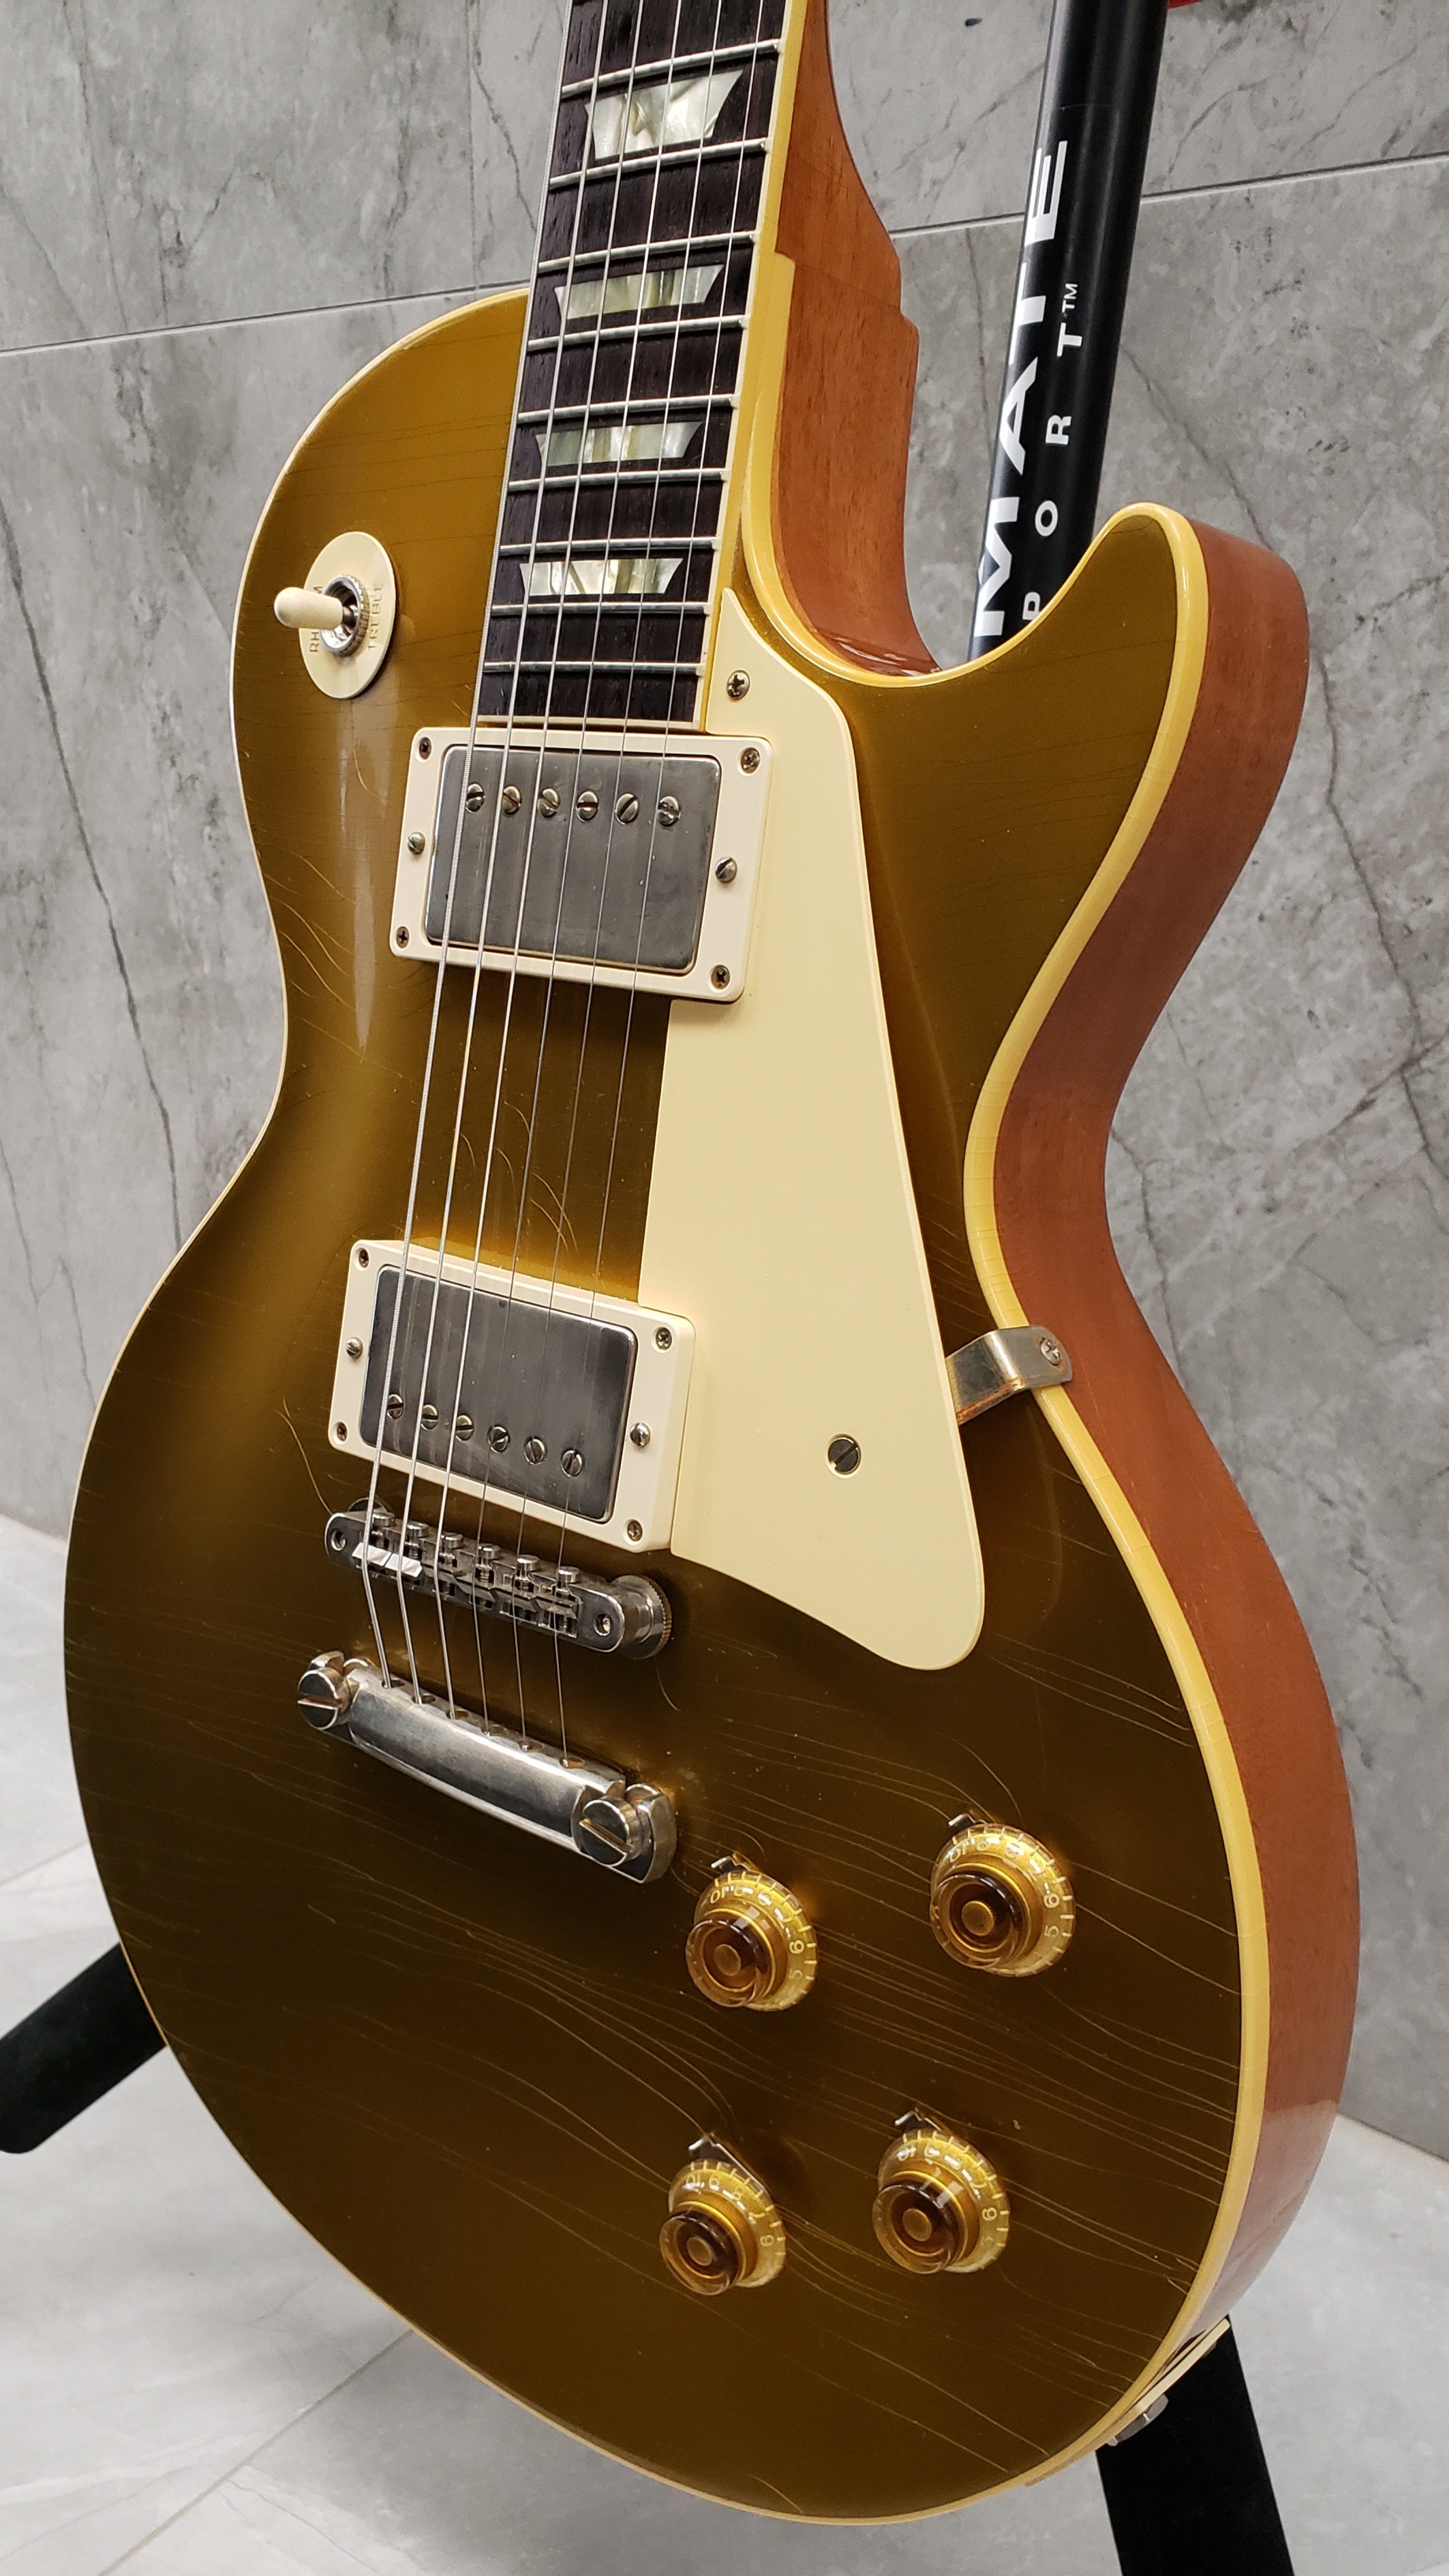 Gibson Custom Shop Murphy Lab 1957 Les Paul Goldtop Ultra Light Aged - Double Gold LPR57ULDGNH SERIAL NUMBER 72770 - 8.8 LBS